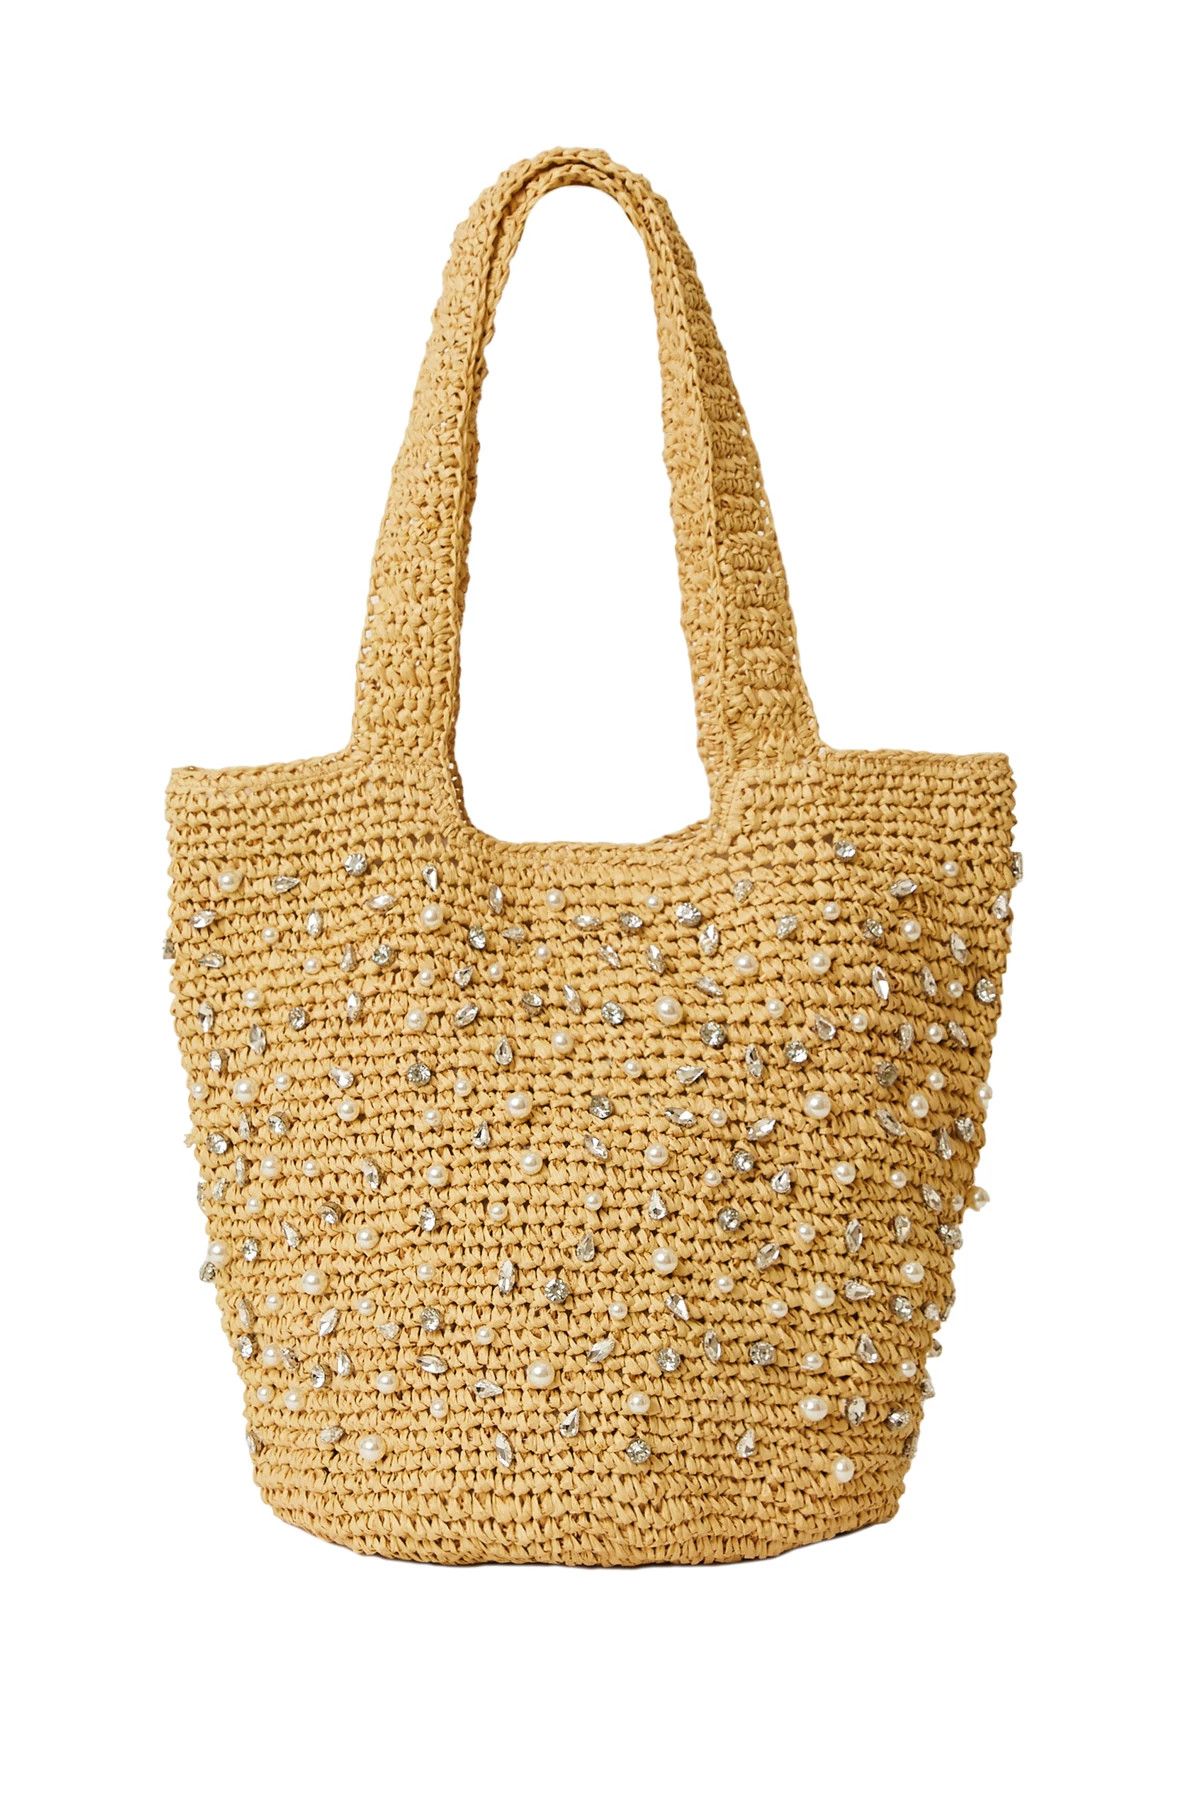 Nia Crystal Hobo Tote | Everything But Water